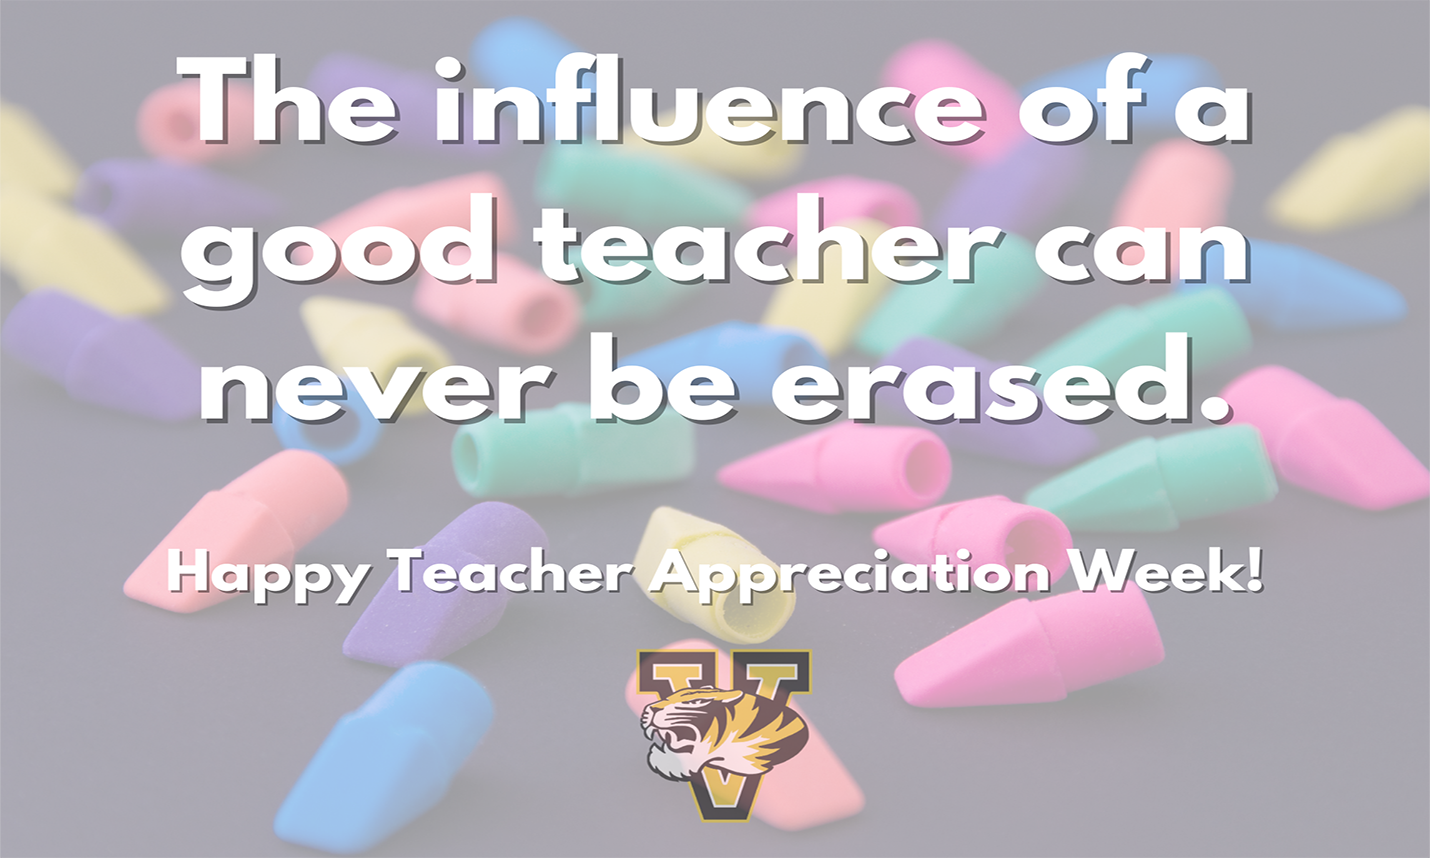 The influence of a good teacher can never be erased.